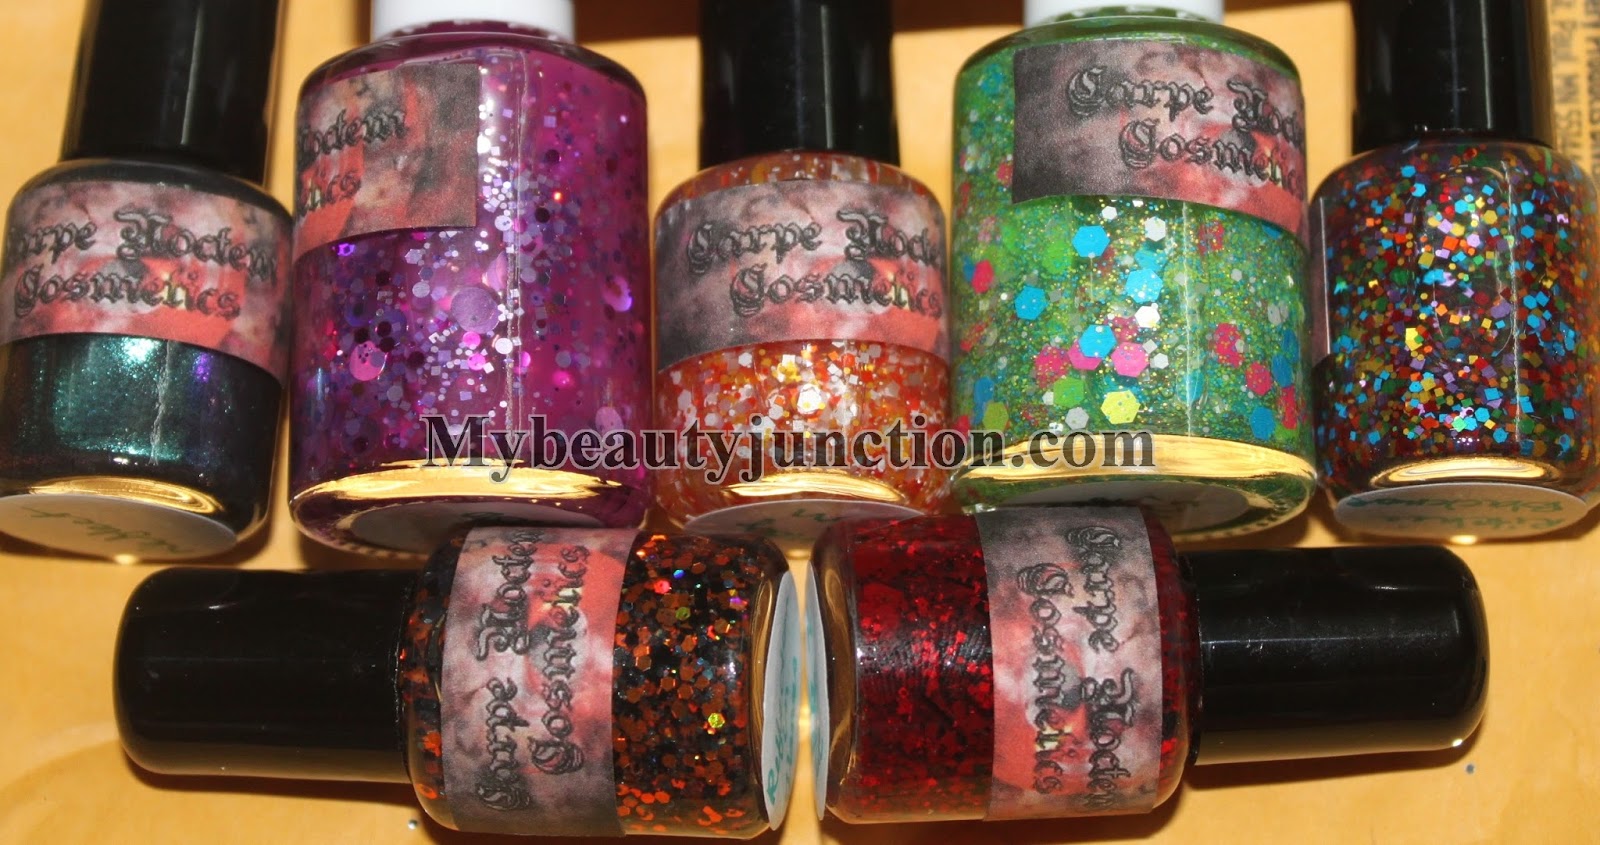 Indie nail polishes from Carpe Noctem Cosmetics' Etsy shop